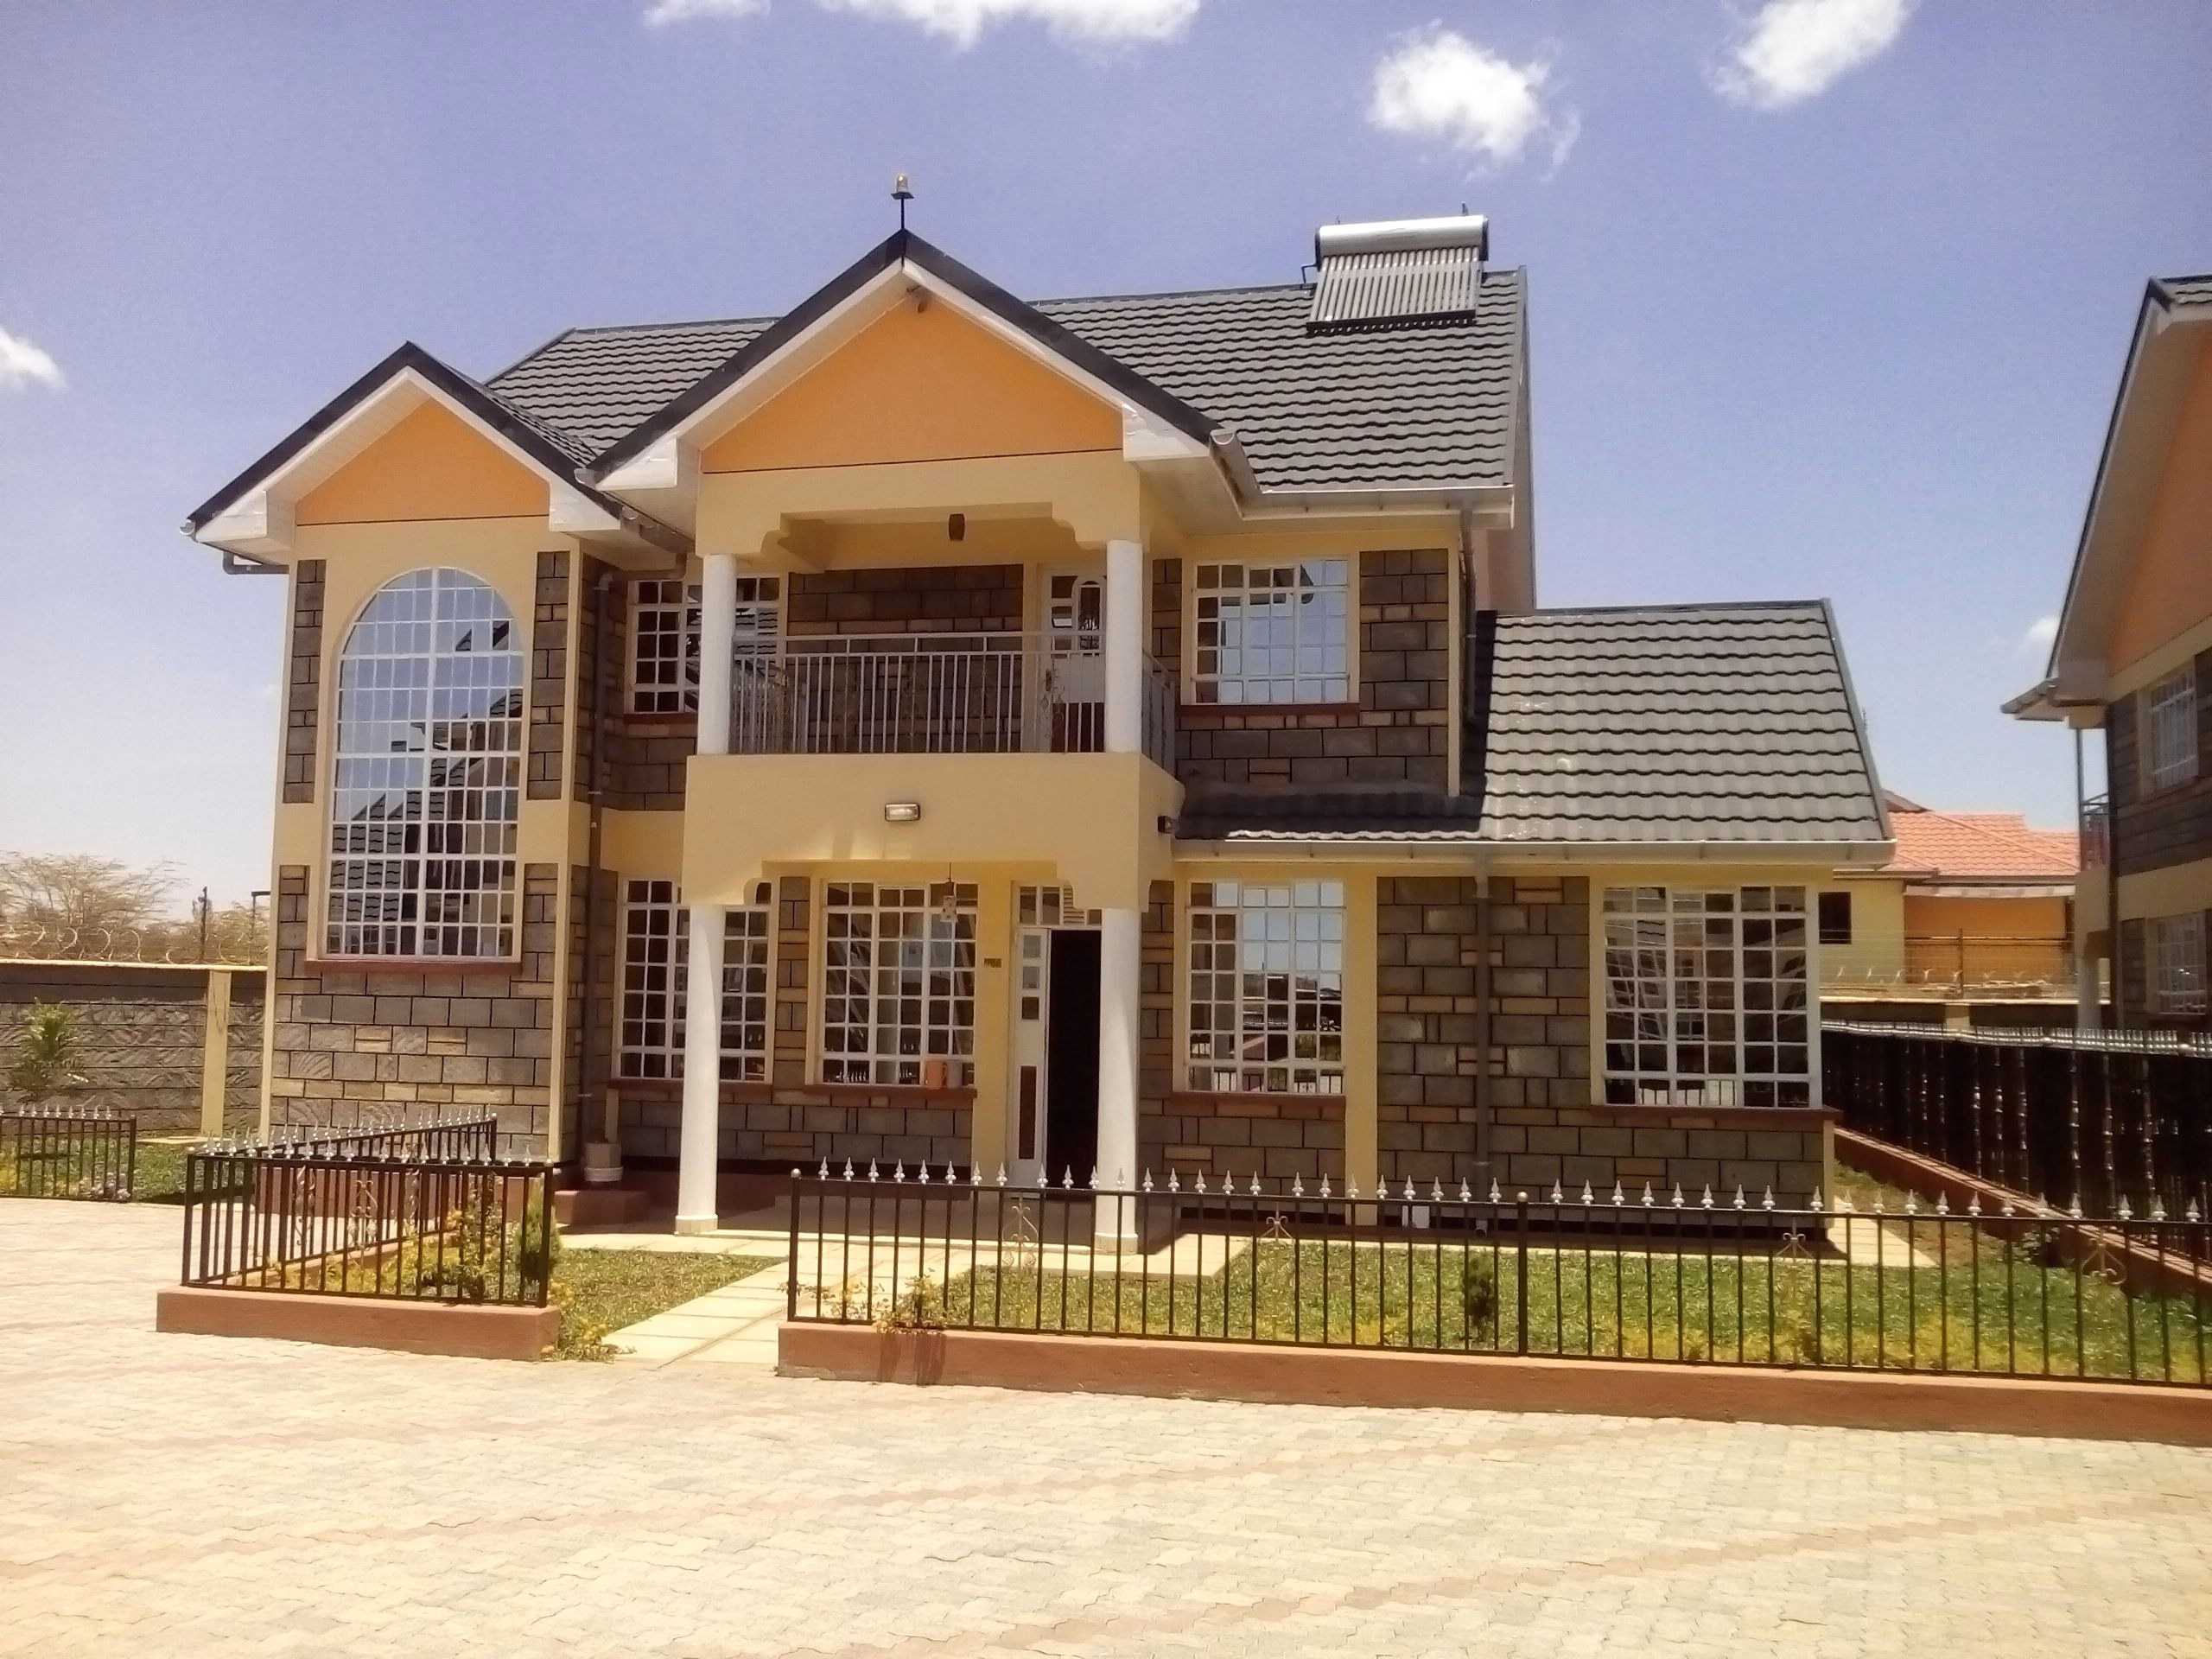 OWNING A HOME IN KENYA